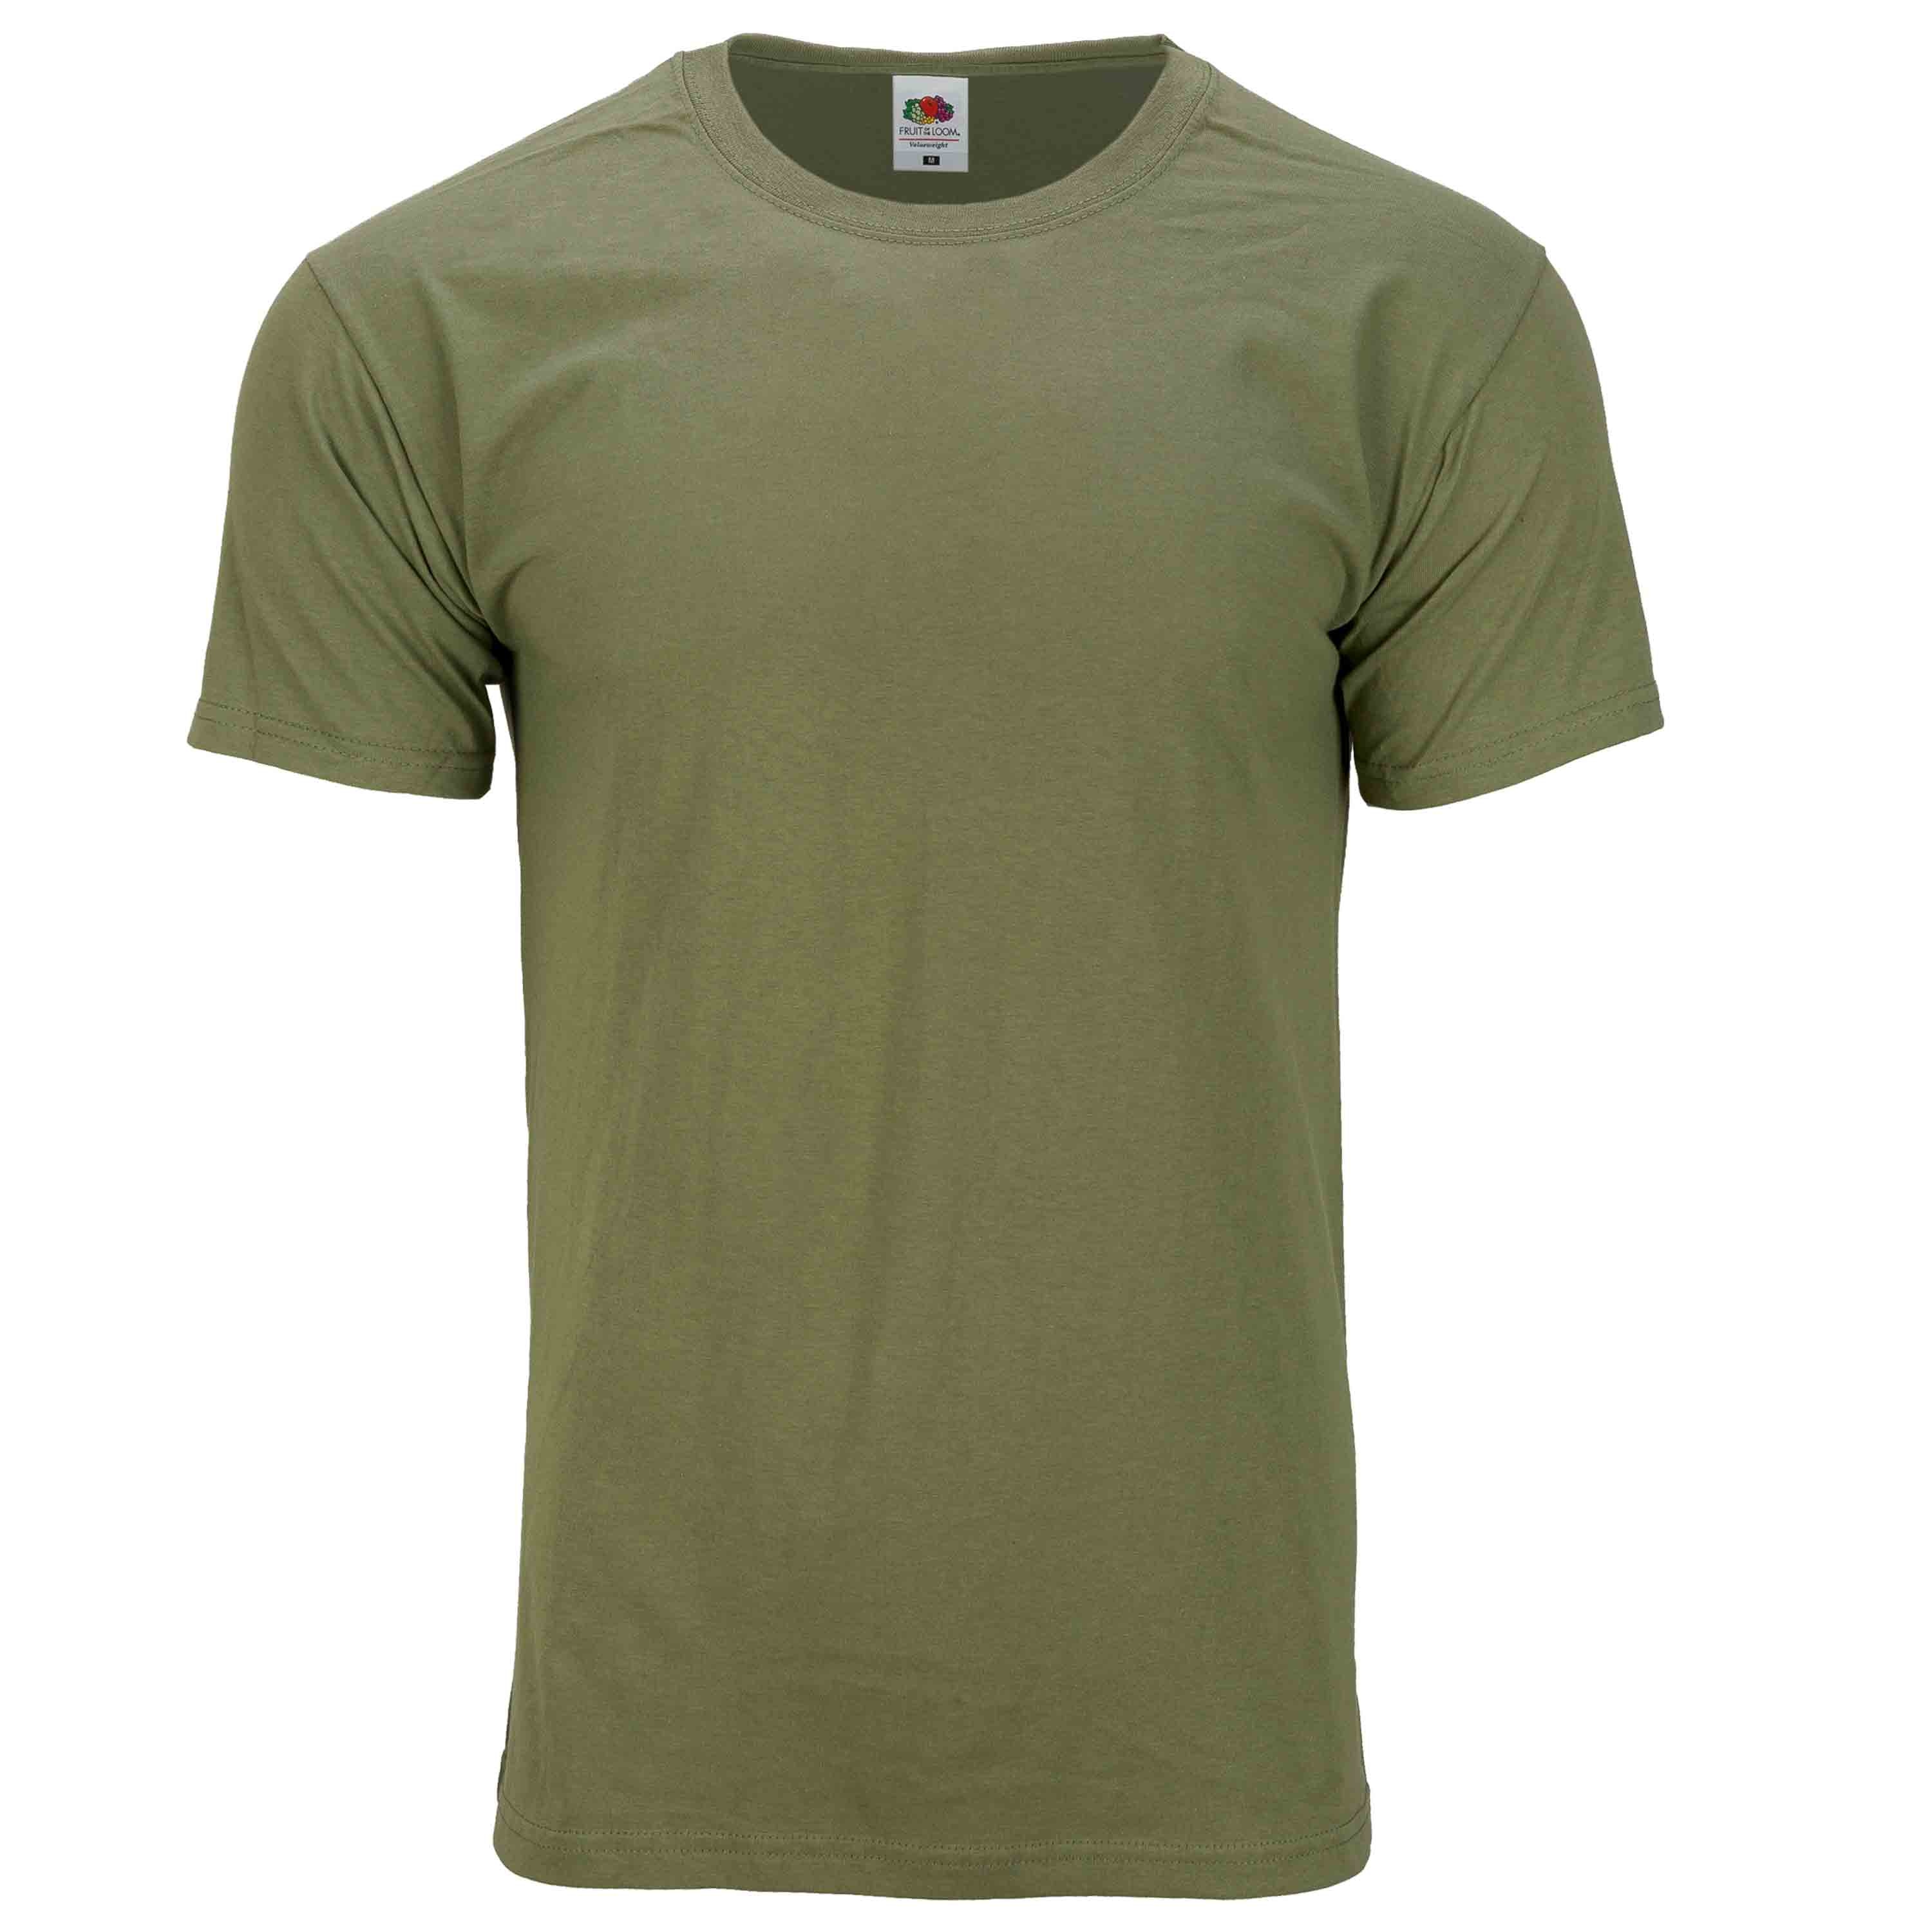 All Sizes Available New 2021 ESP Green/Olive Minimal T Shirt 